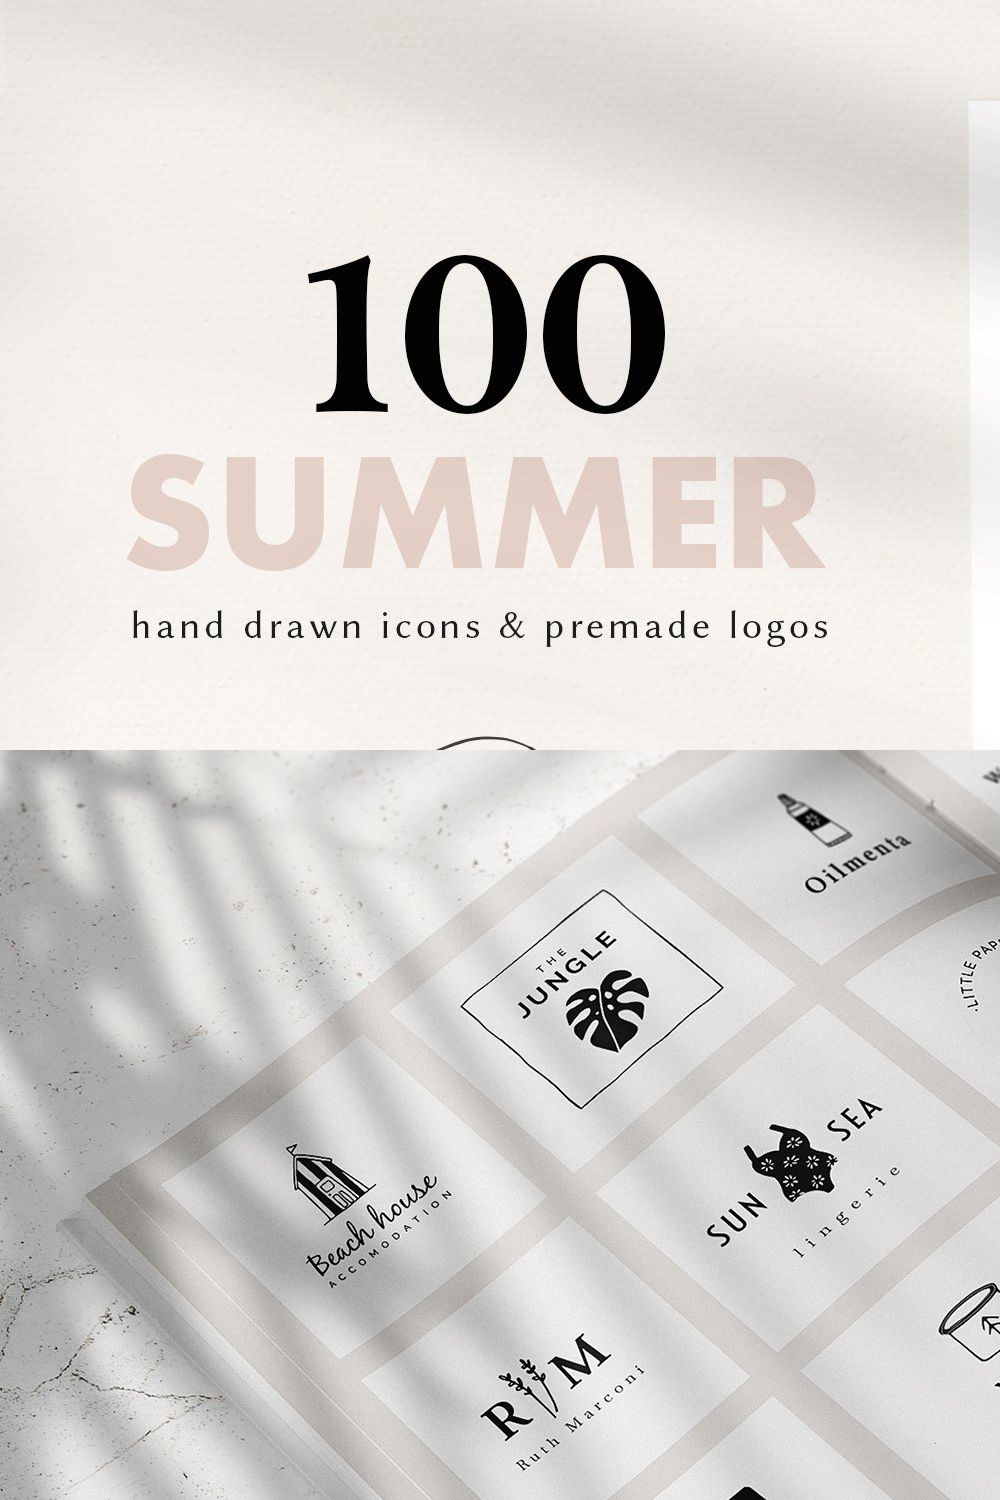 100 SUMMER hand drawn icons & logos pinterest preview image.